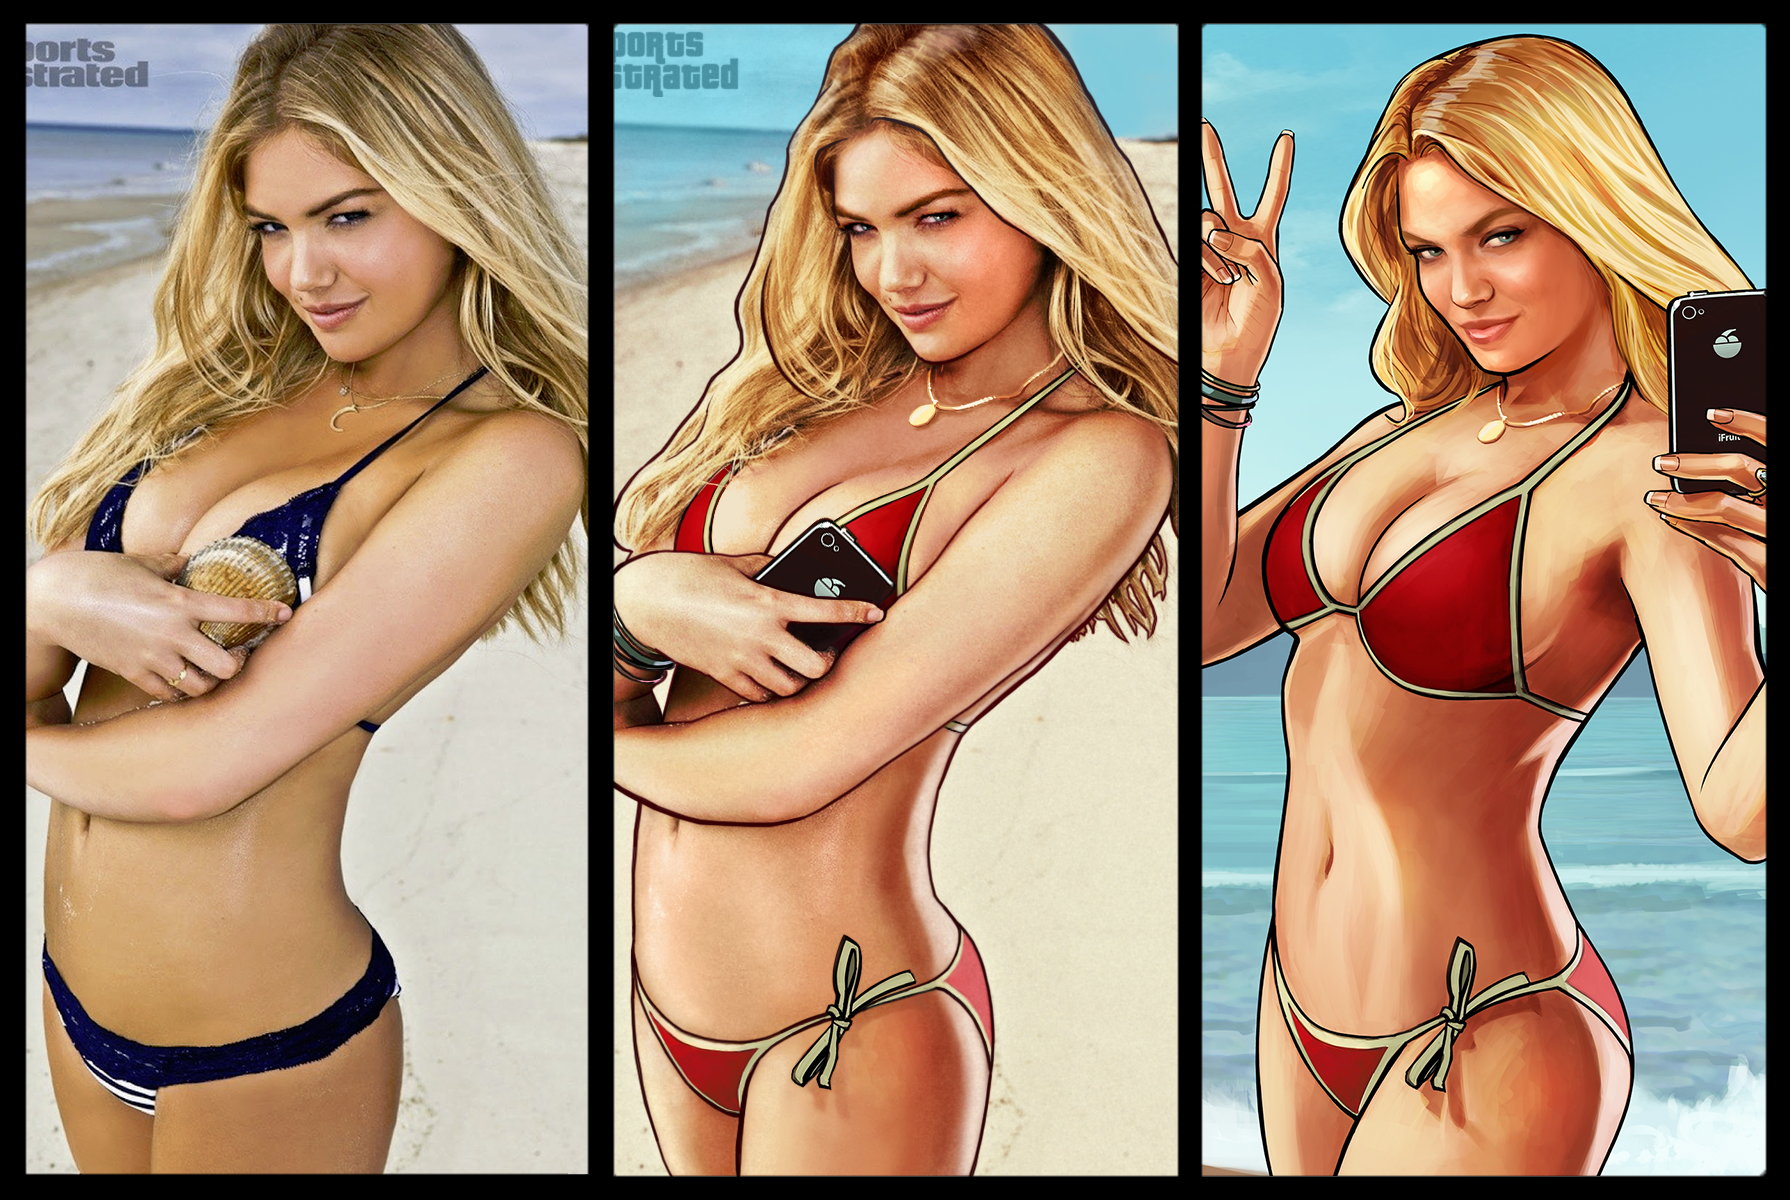 Thats not Kate Upton in the Grand Theft Auto V ads—its this model picture